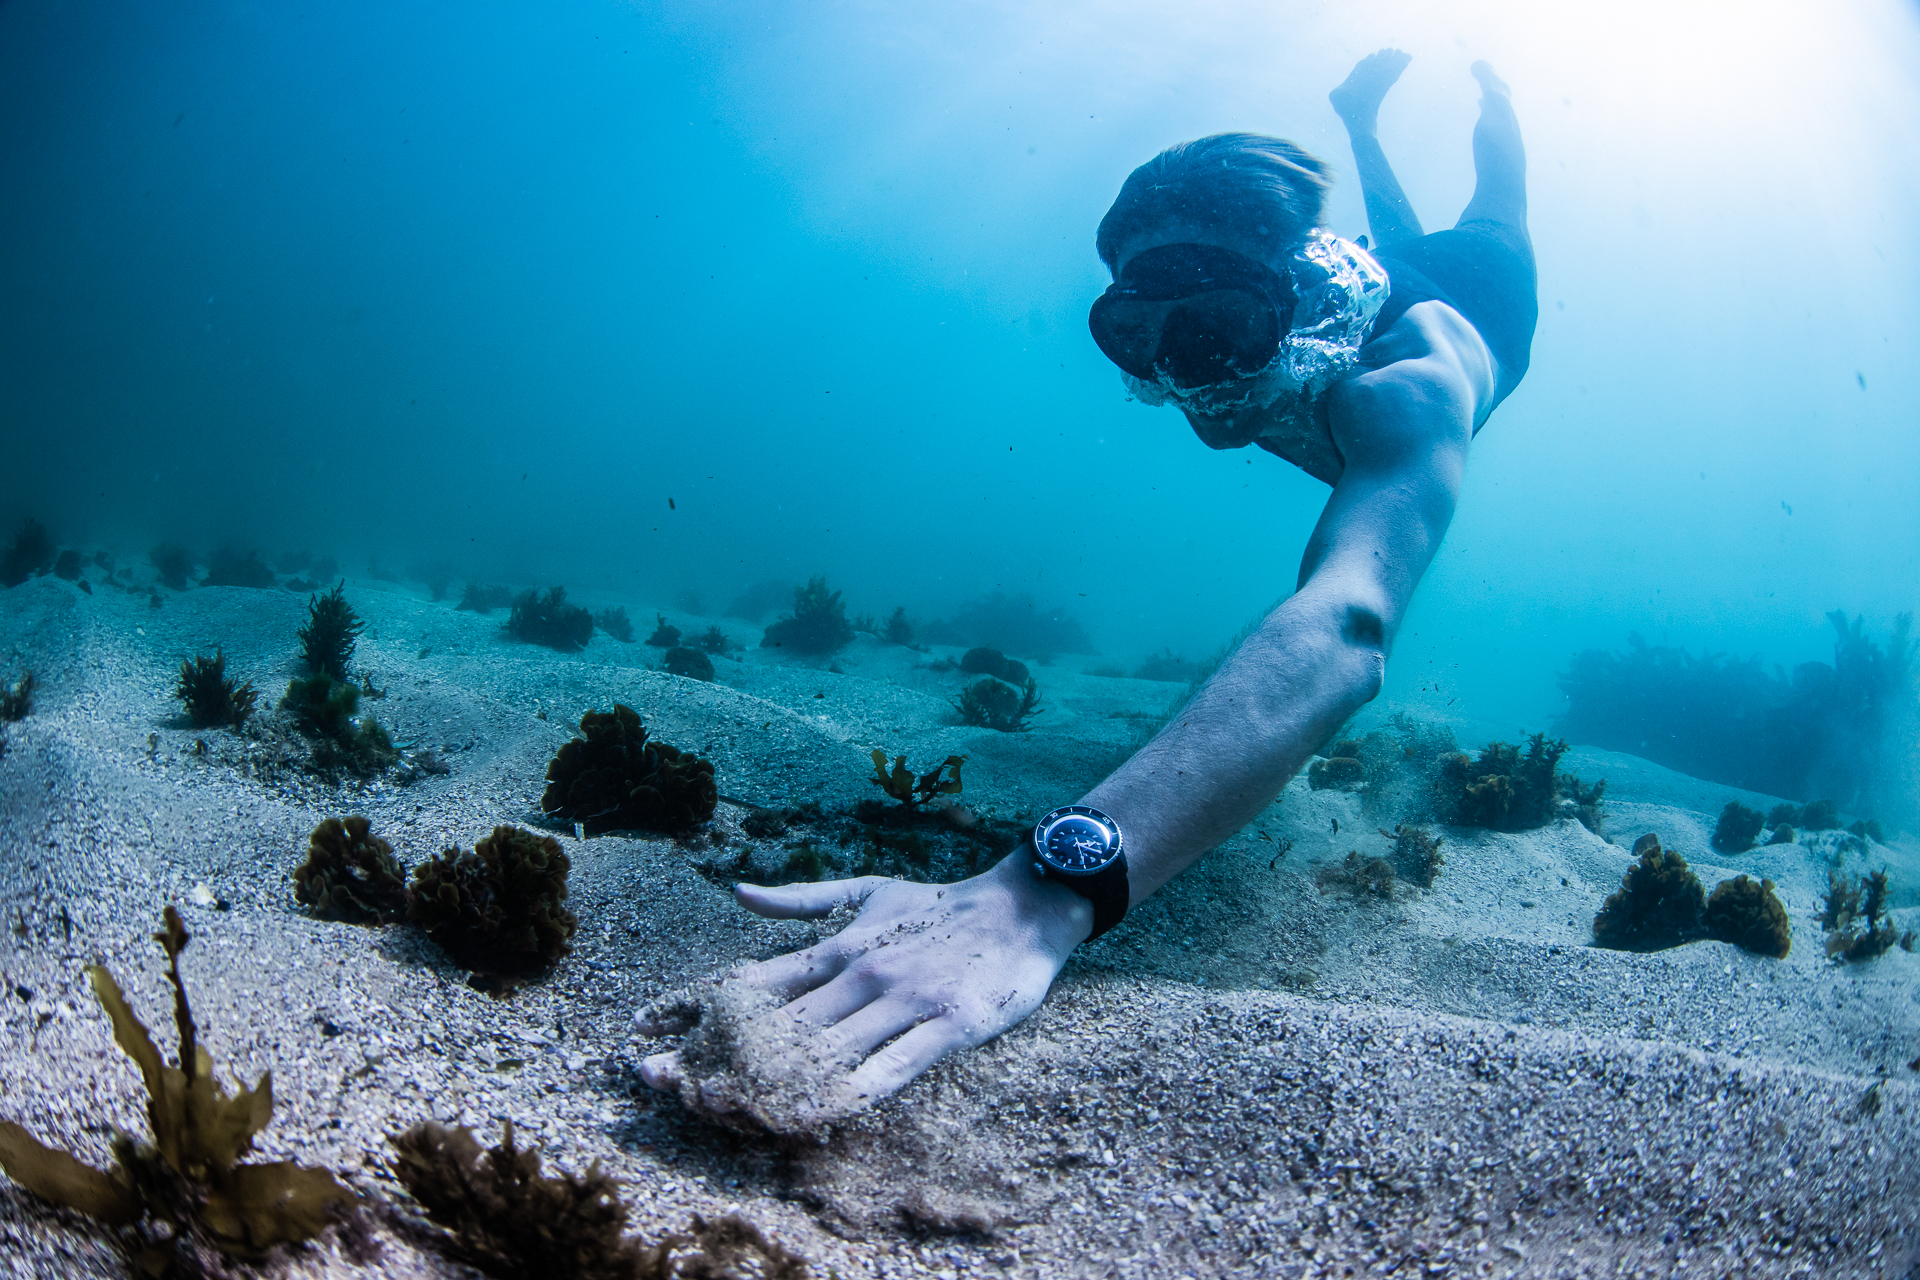 Rado&#8217;s Captain Cook HTC Diver Thrives On The Wrist Of Underwater Photographer Piers Haskard